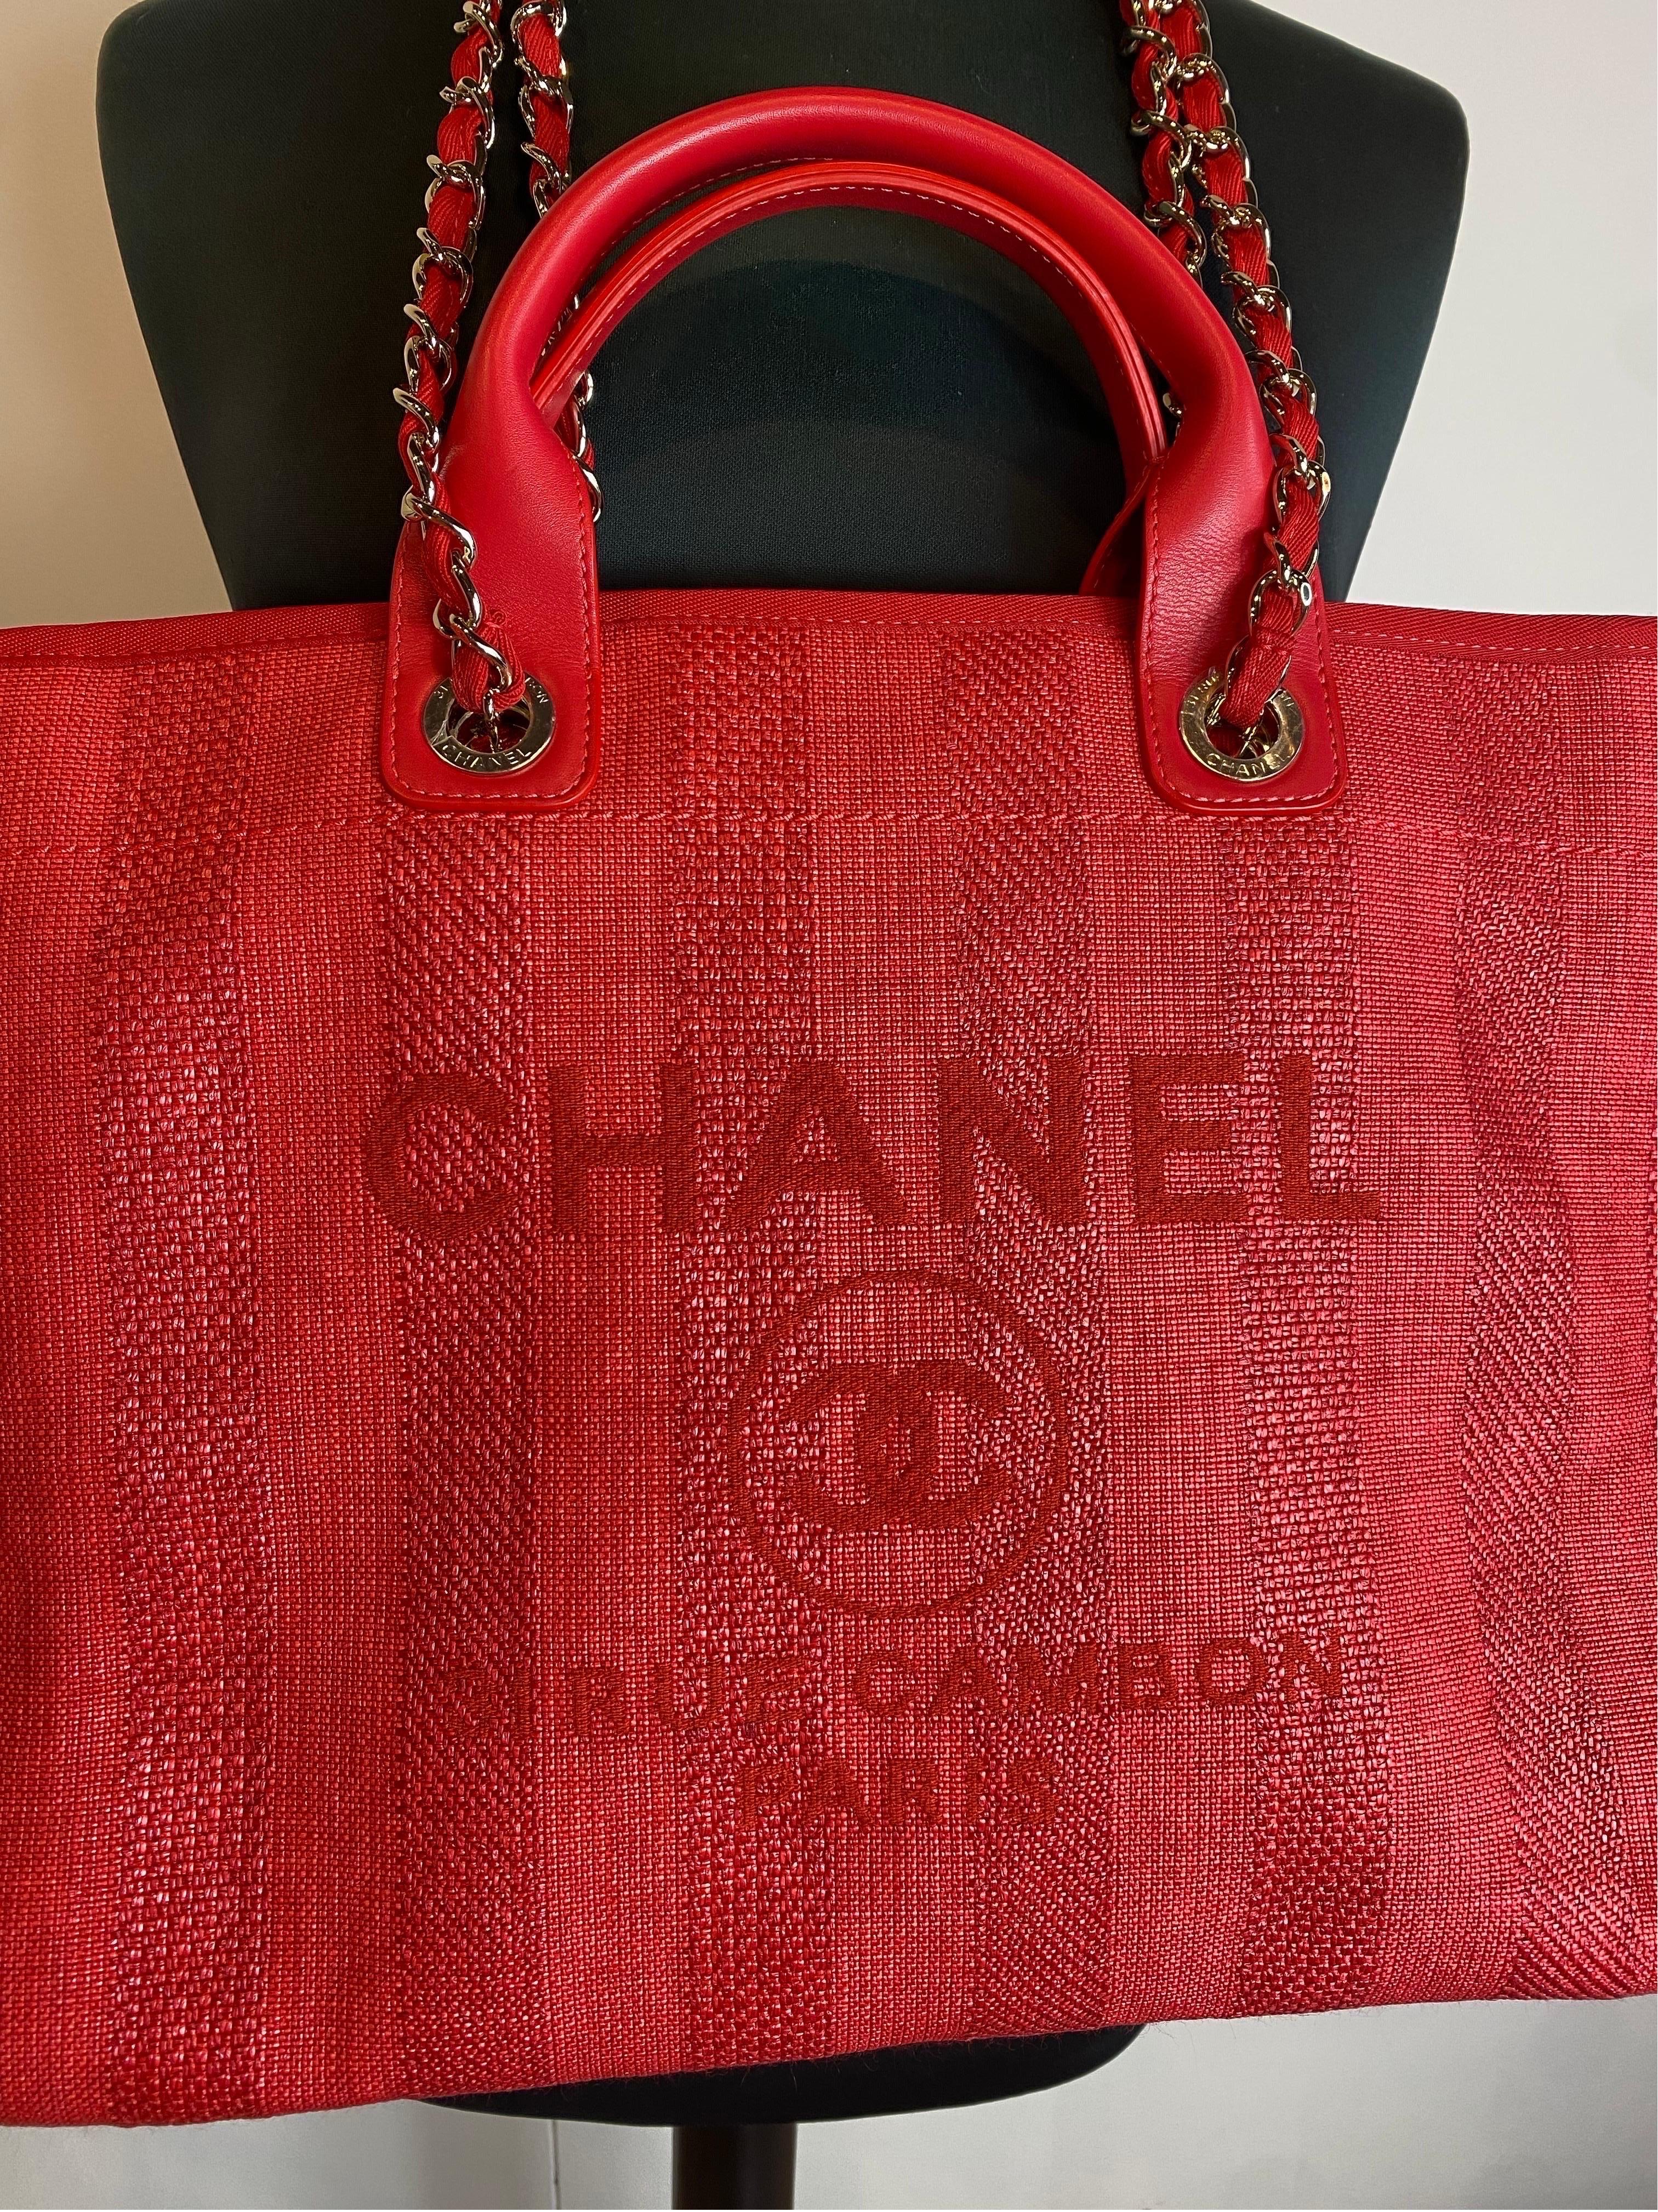 Chanel Deauville red stripes Shoulder Bag In Excellent Condition For Sale In Carnate, IT